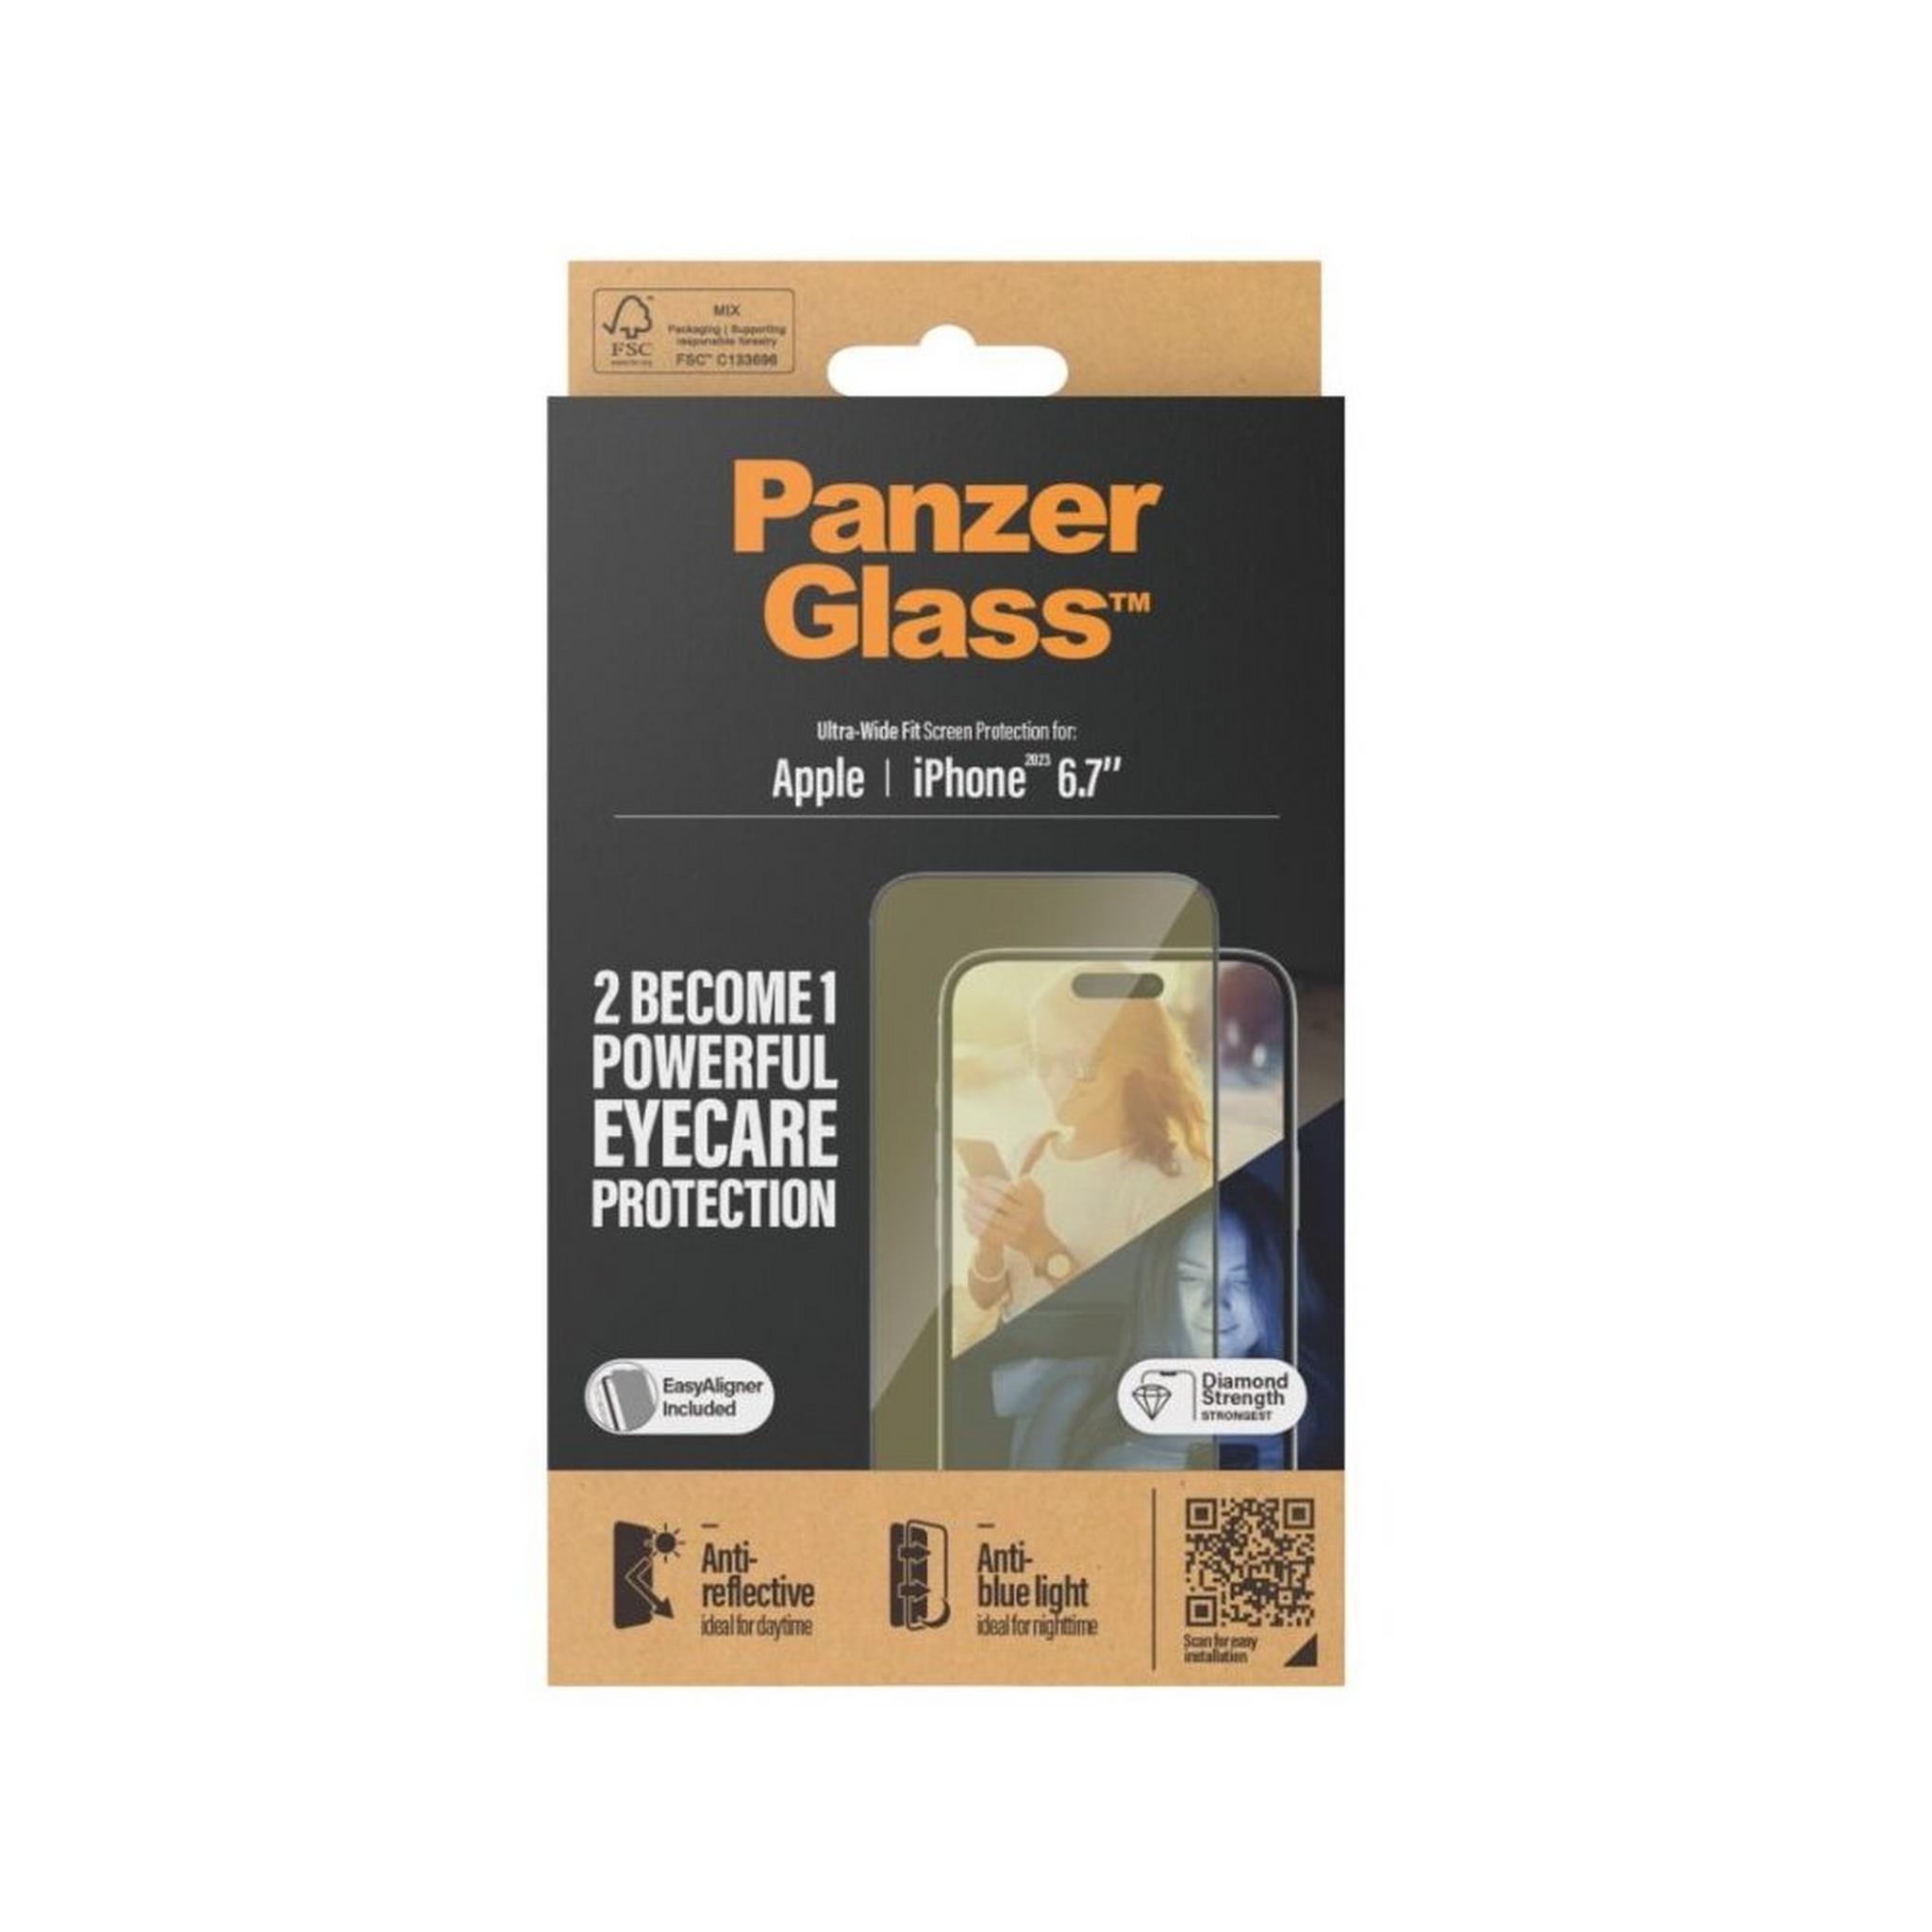 PanzerGlass Anti-Reflect, Anti-Blue light Ultra Wide Fit Screen Protector for iPhone 15 Plus, 2815